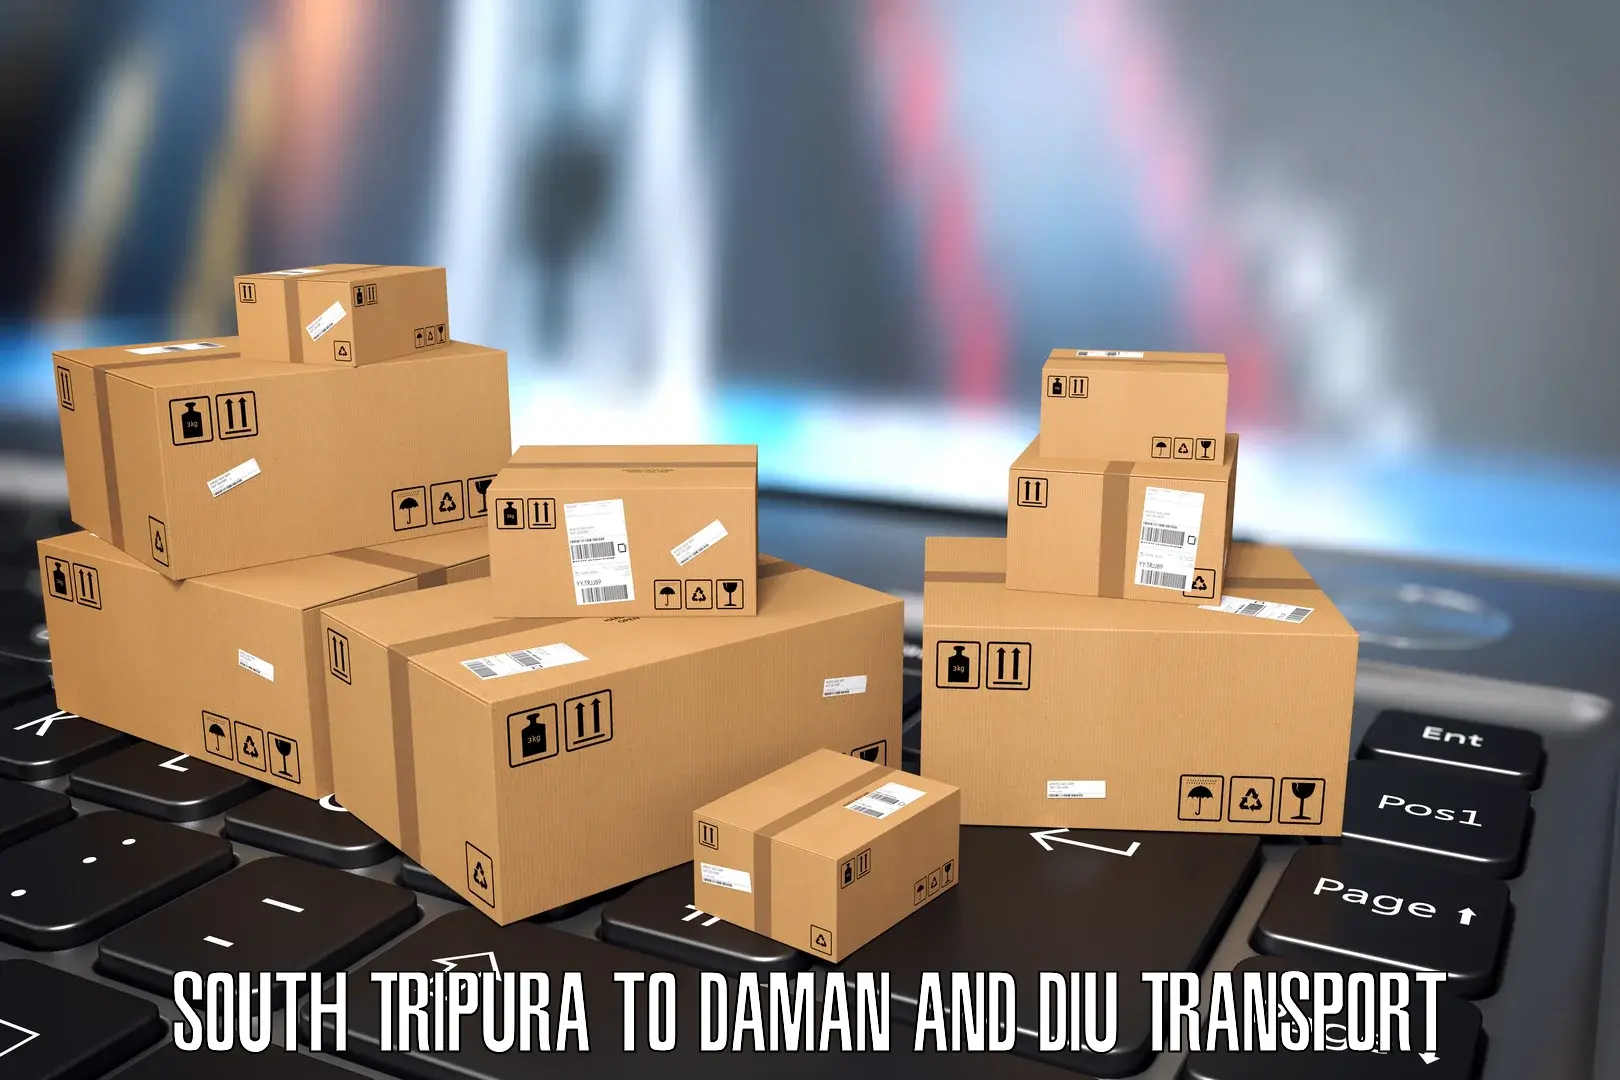 Vehicle transport services South Tripura to Daman and Diu